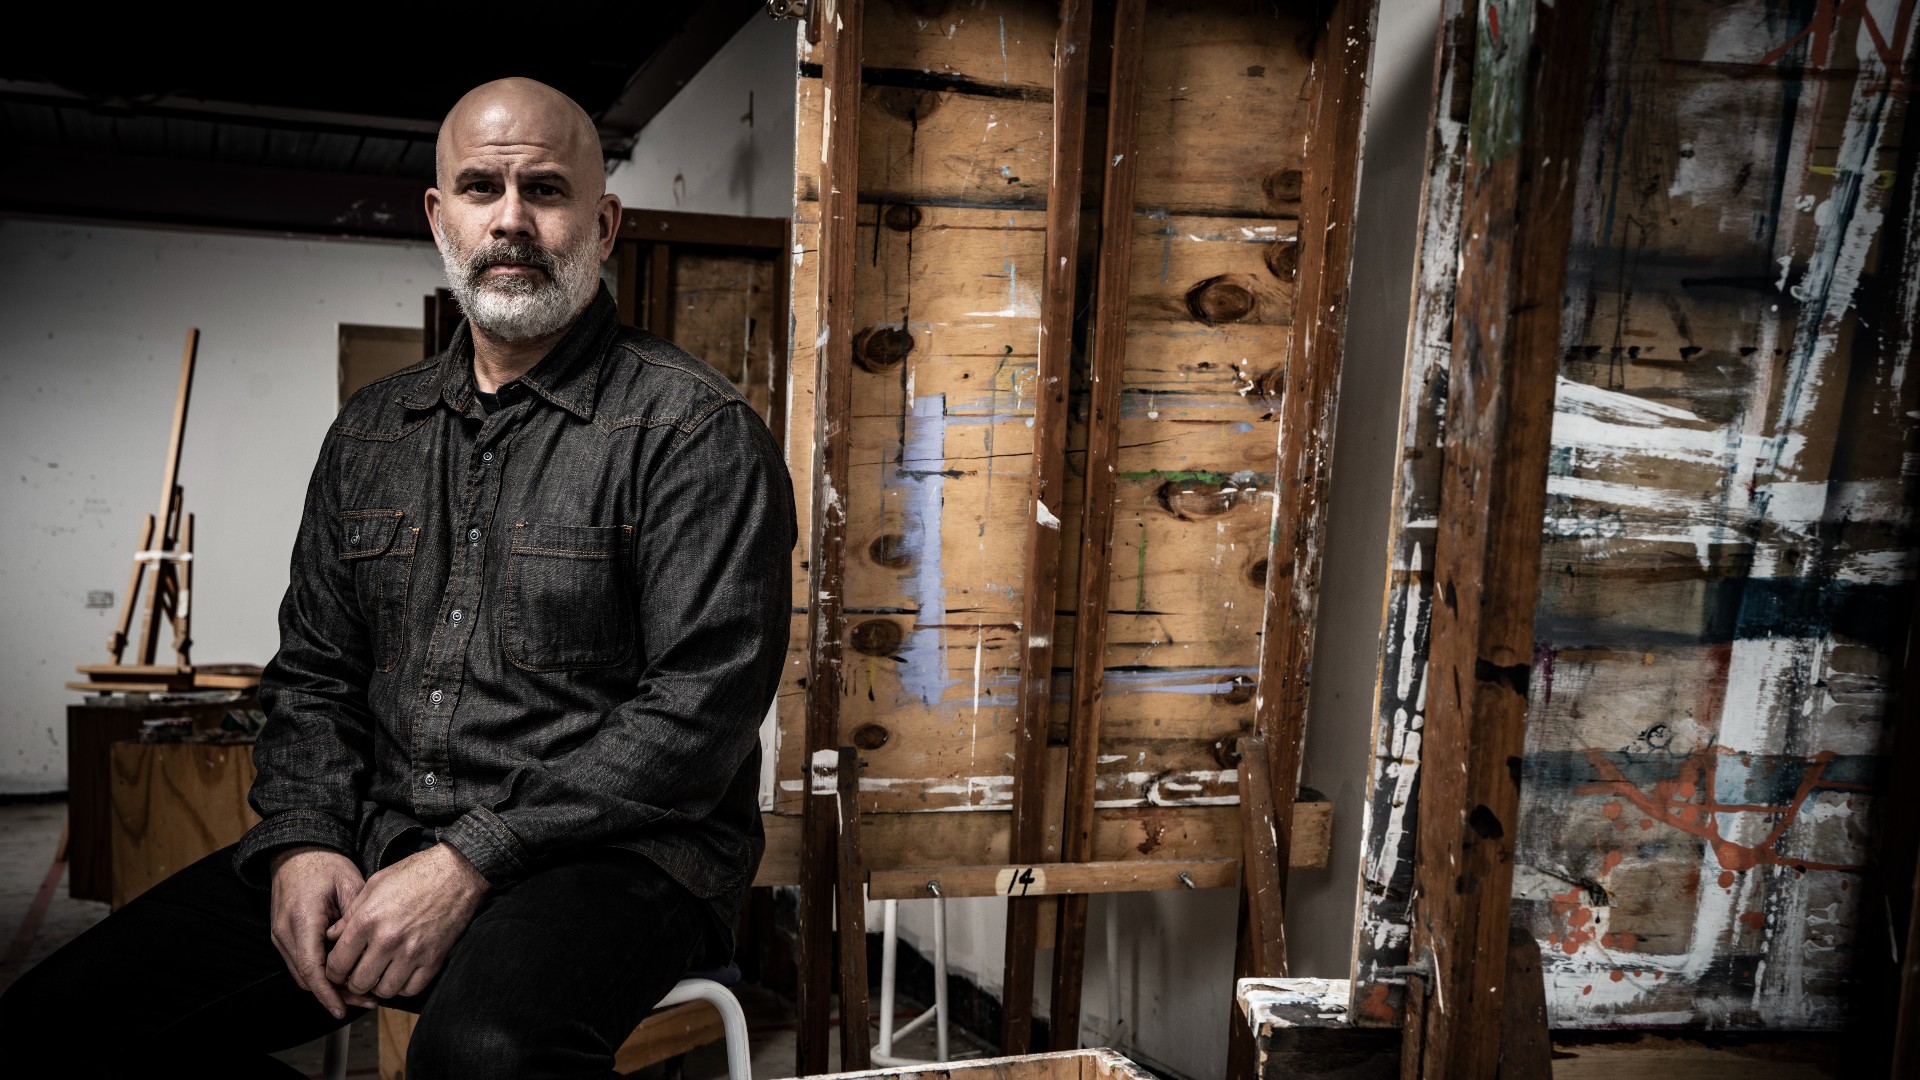 Teo Treloar, wearing a black jacket and pants, sits on a stool in an art studio, surrounded by paint on the walls. Photo: Paul Jones